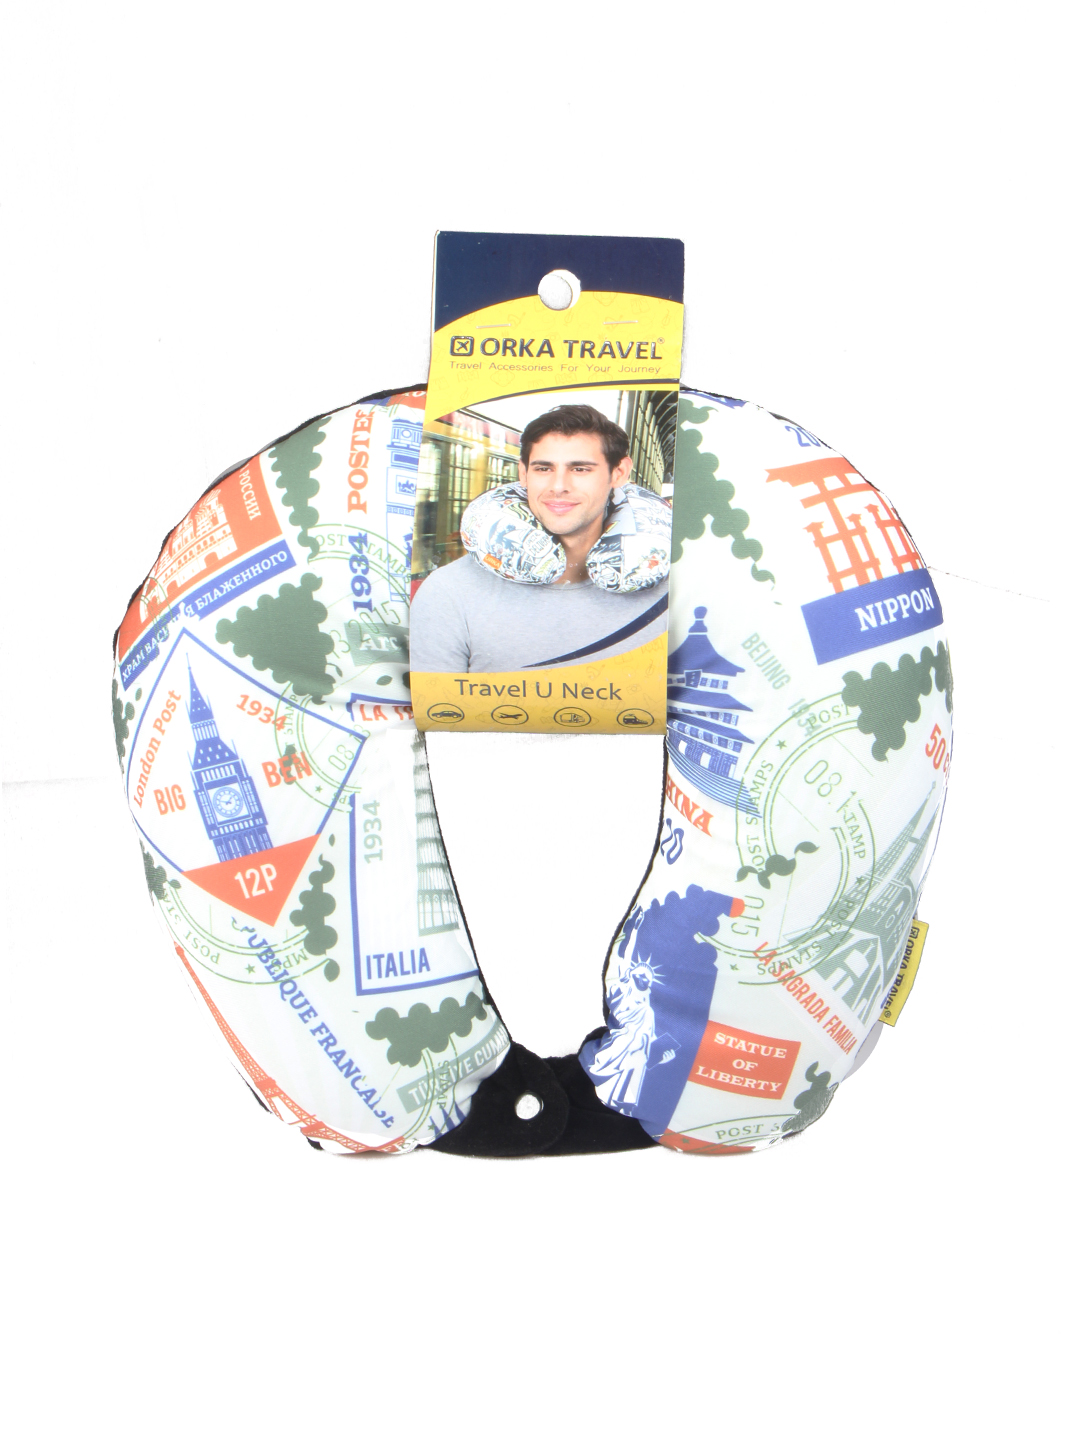 ORKA Travel Digital Printed Spandex With Micro Beads Travel U Neck Pillow World  